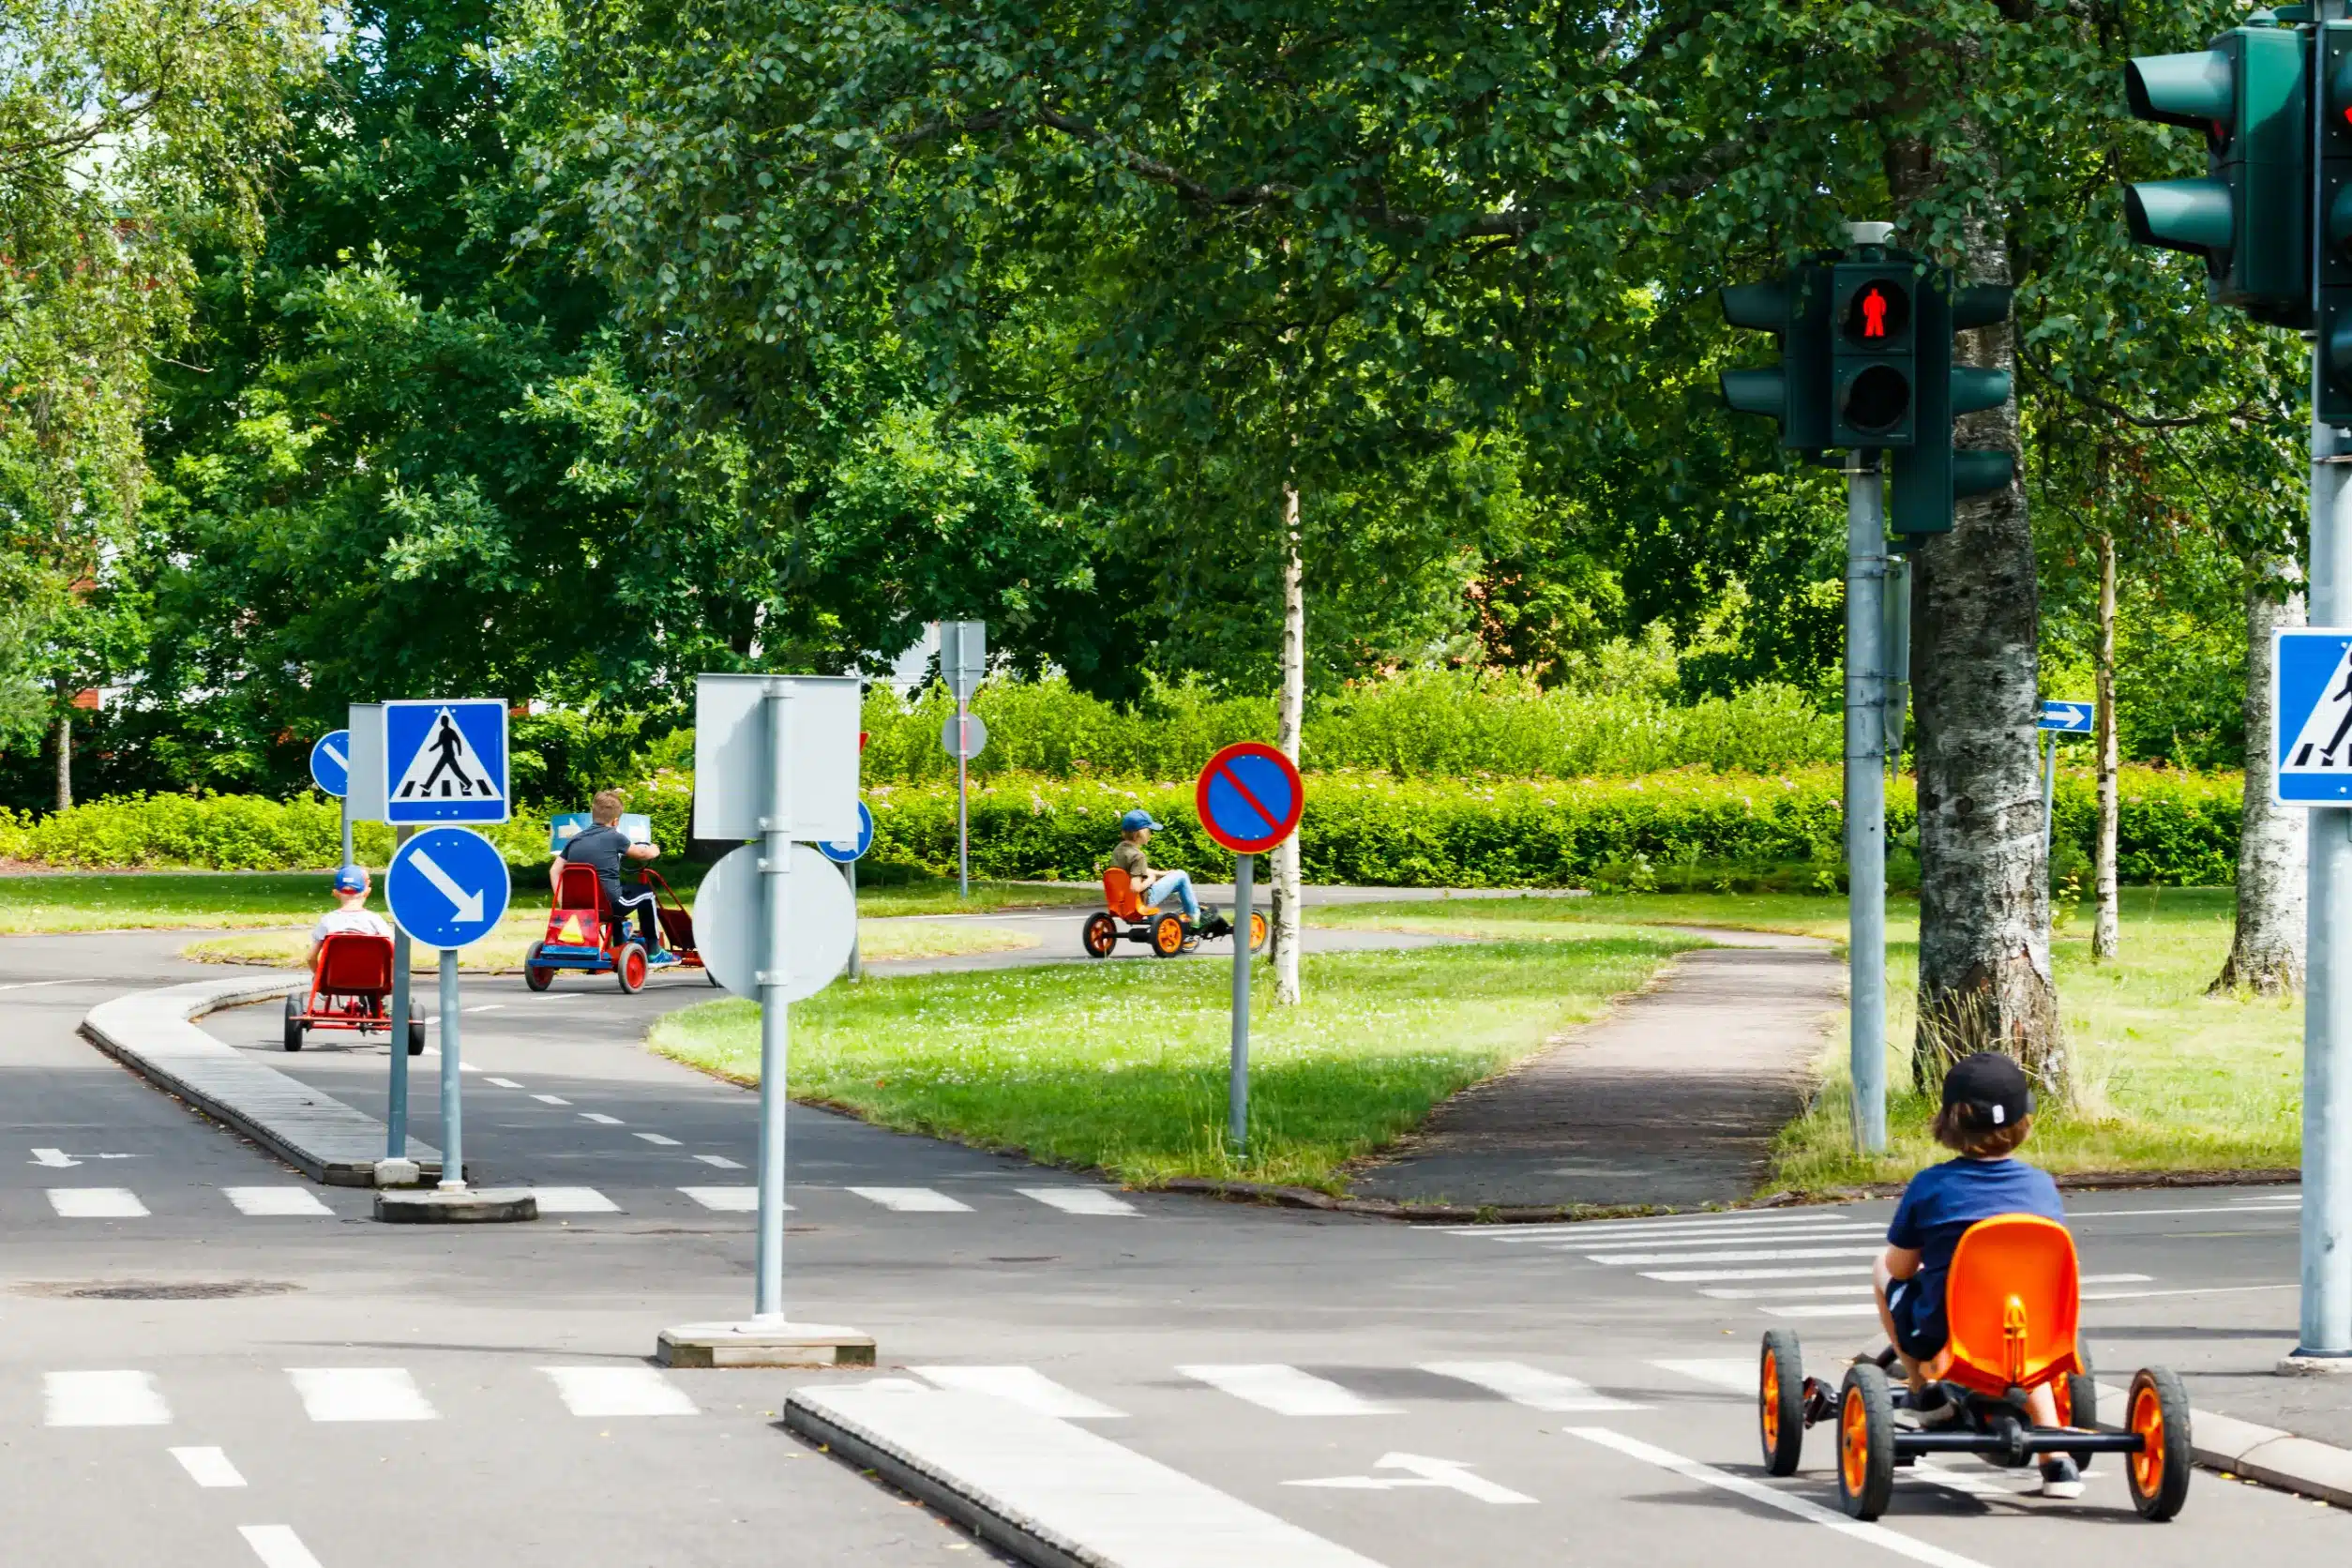 Kids riding bikes in an area with pedestrian and bicycle road signs